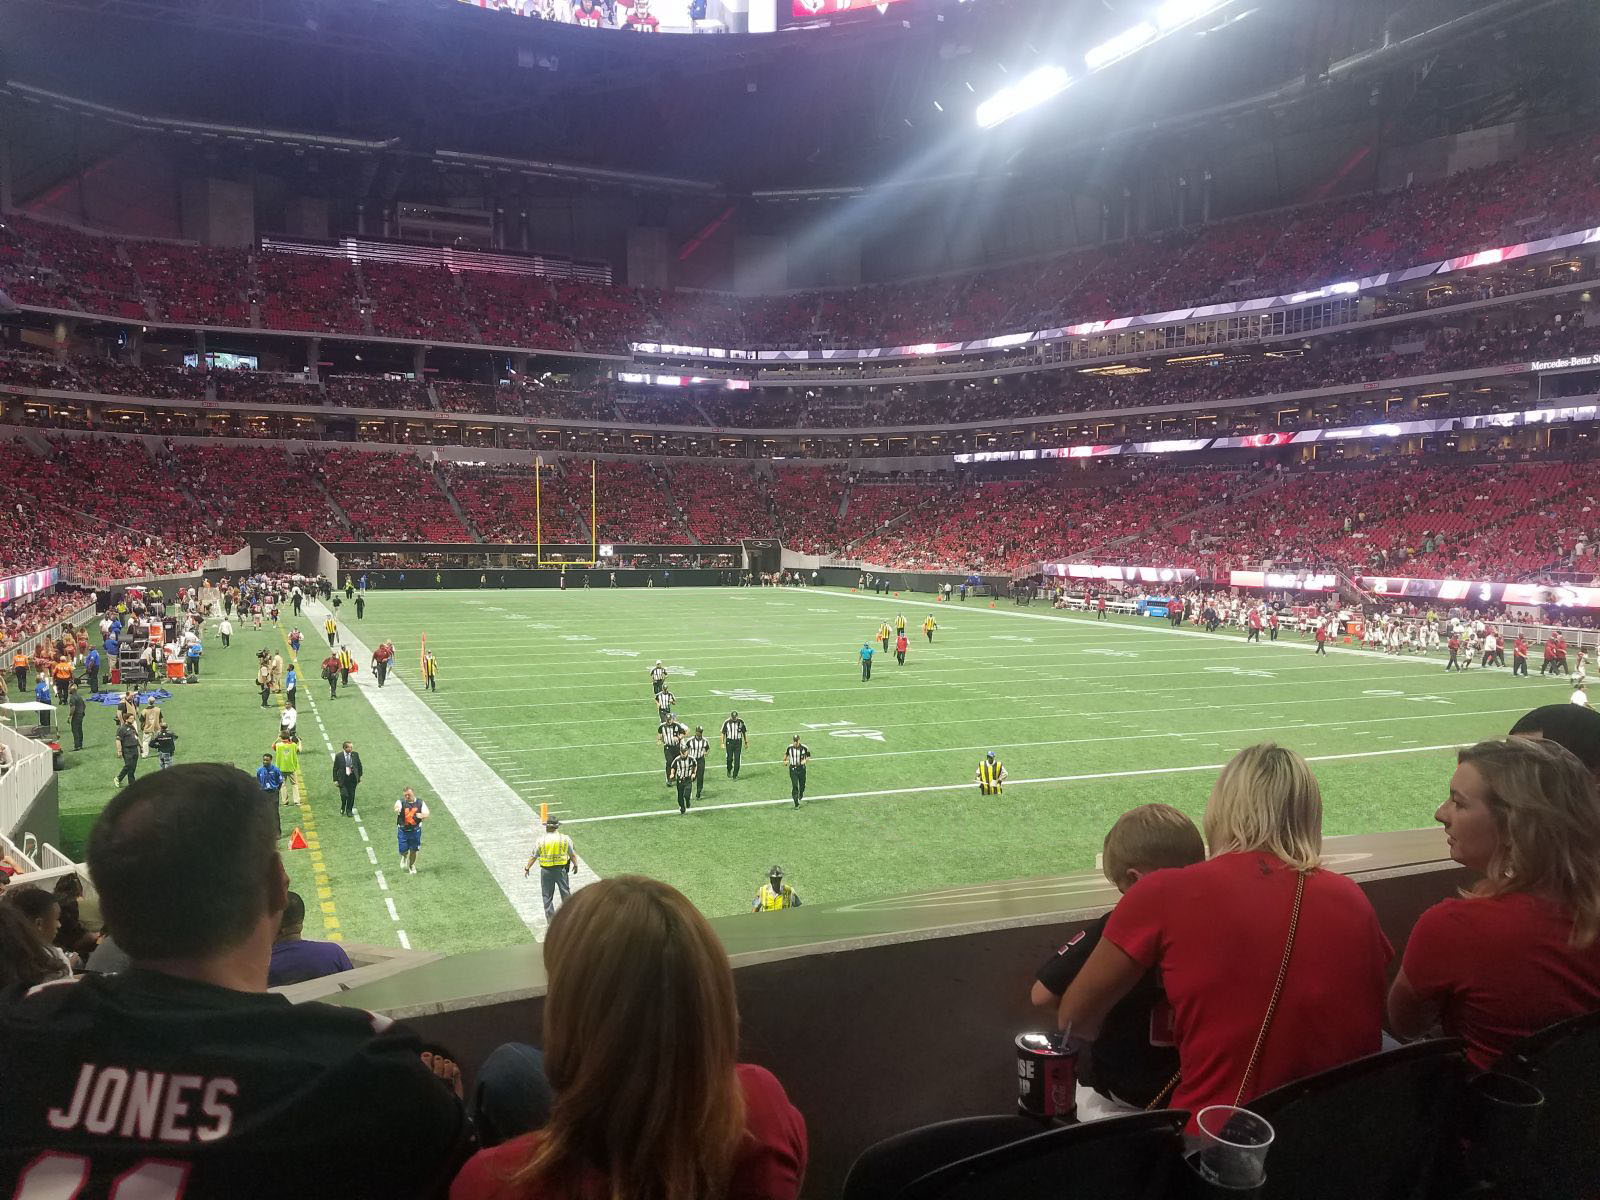 section 103, row 16 seat view  for football - mercedes-benz stadium